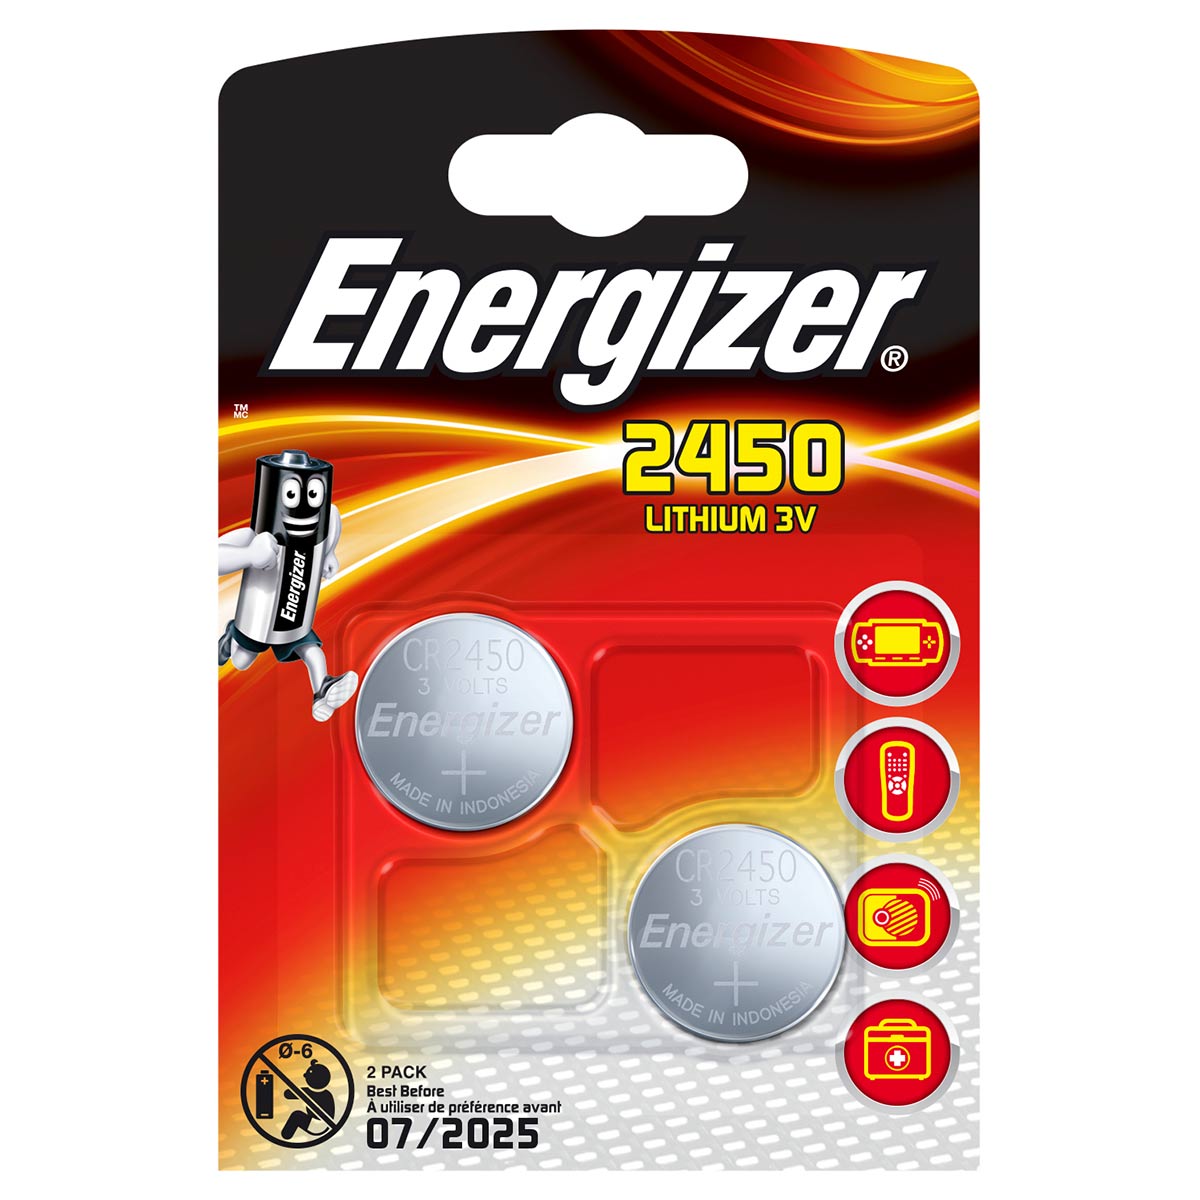 CR 2450 Energizer Lithium 2pcs in a blister